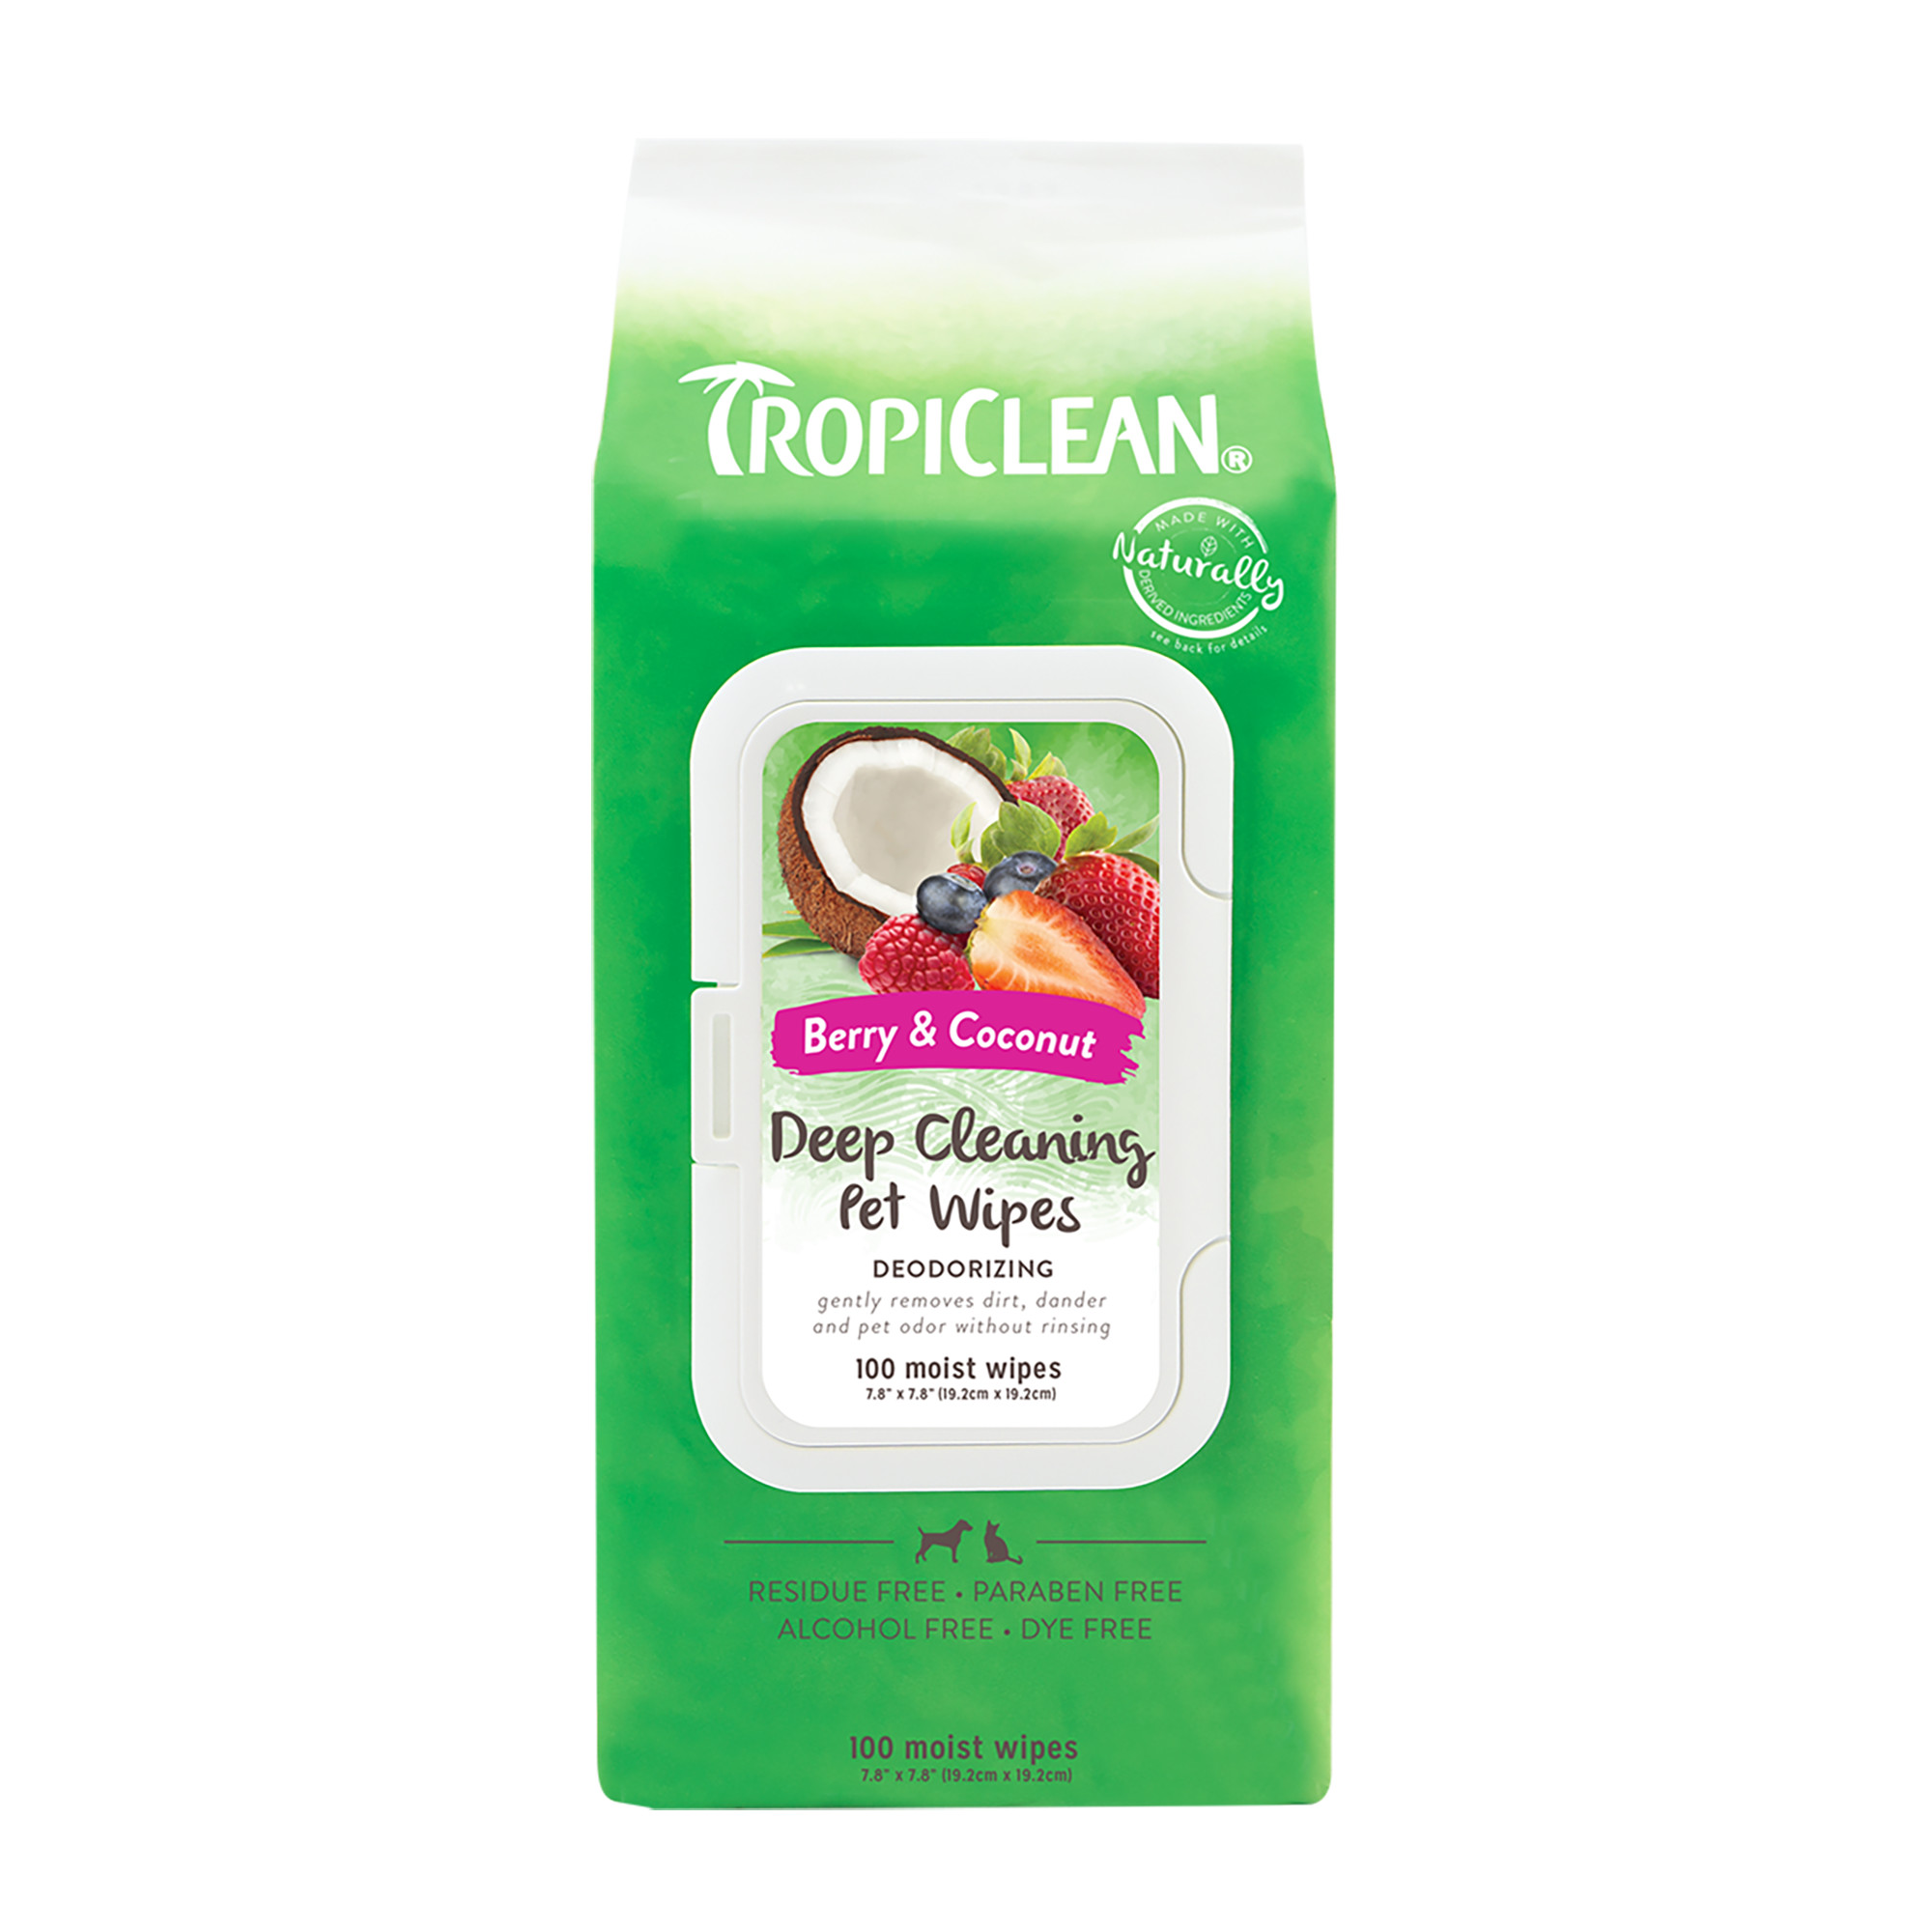 Berry & Coconut Deep Cleaning Pet Wipes